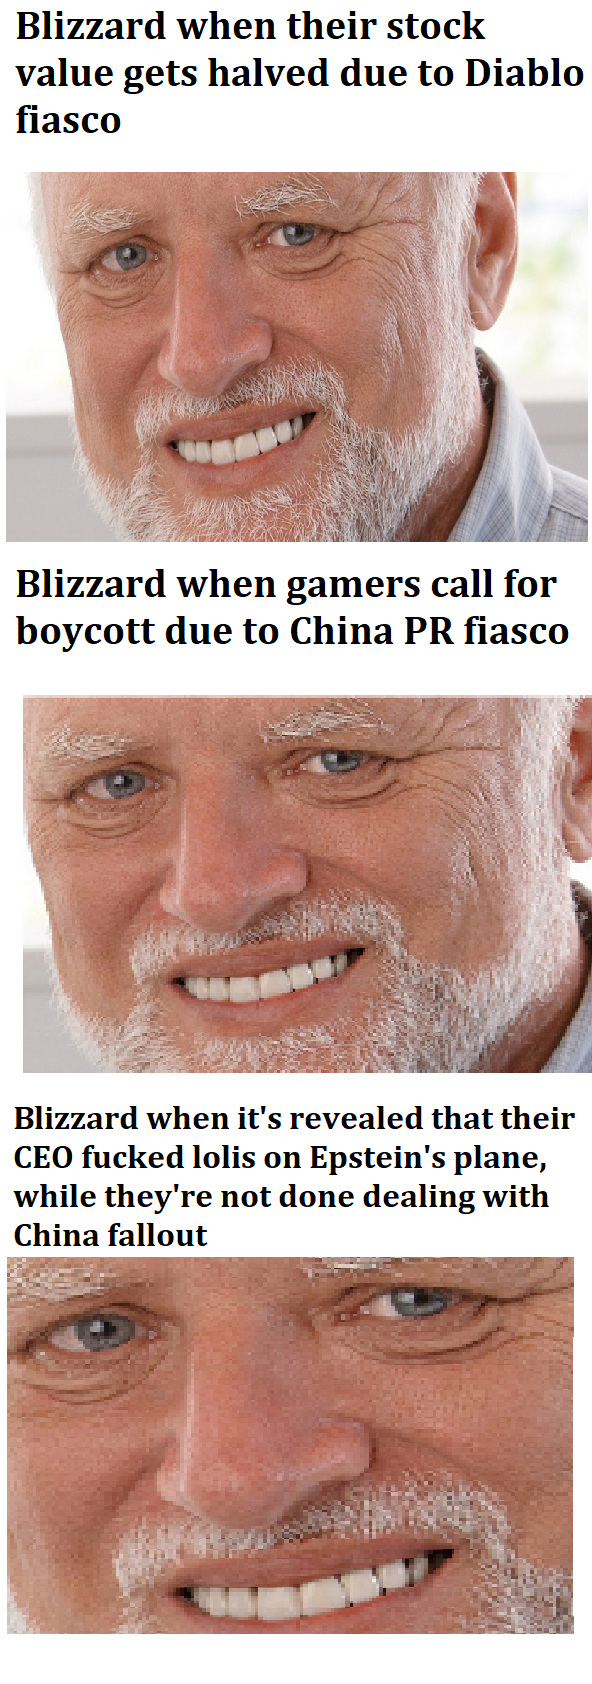 Can I get an "oof" for my boy blizzord